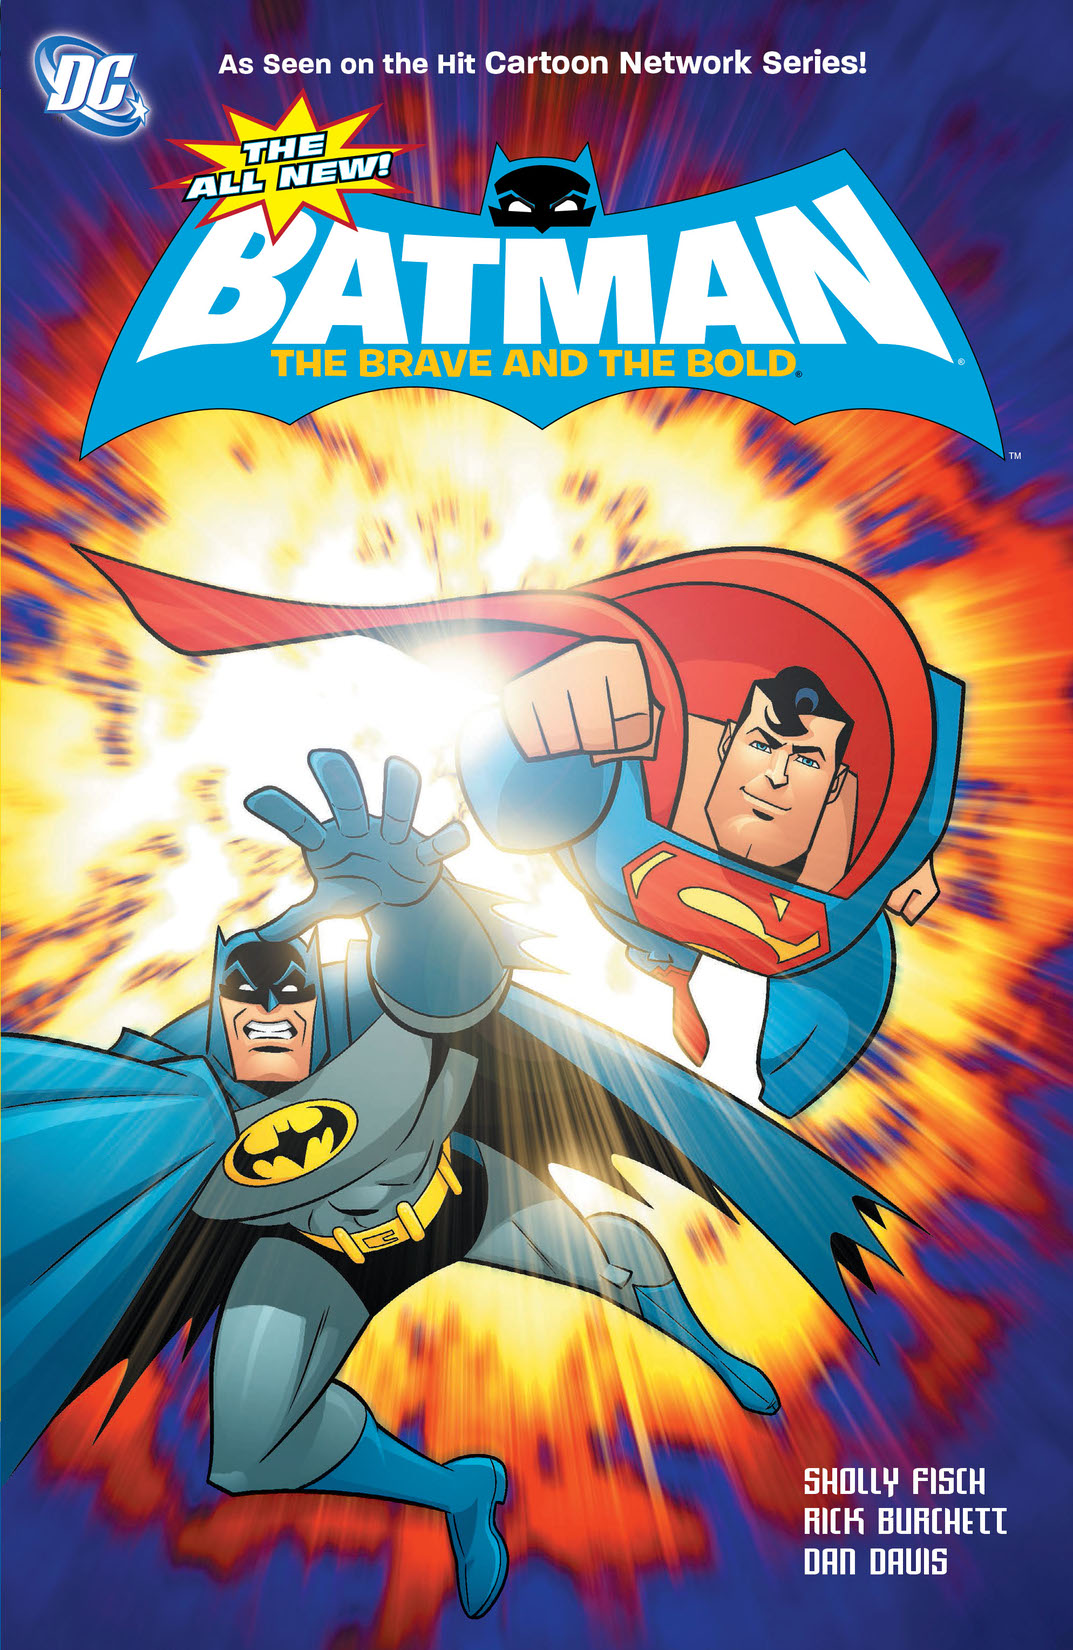 The All-New Batman: Brave and the Bold Vol. 1 preview images